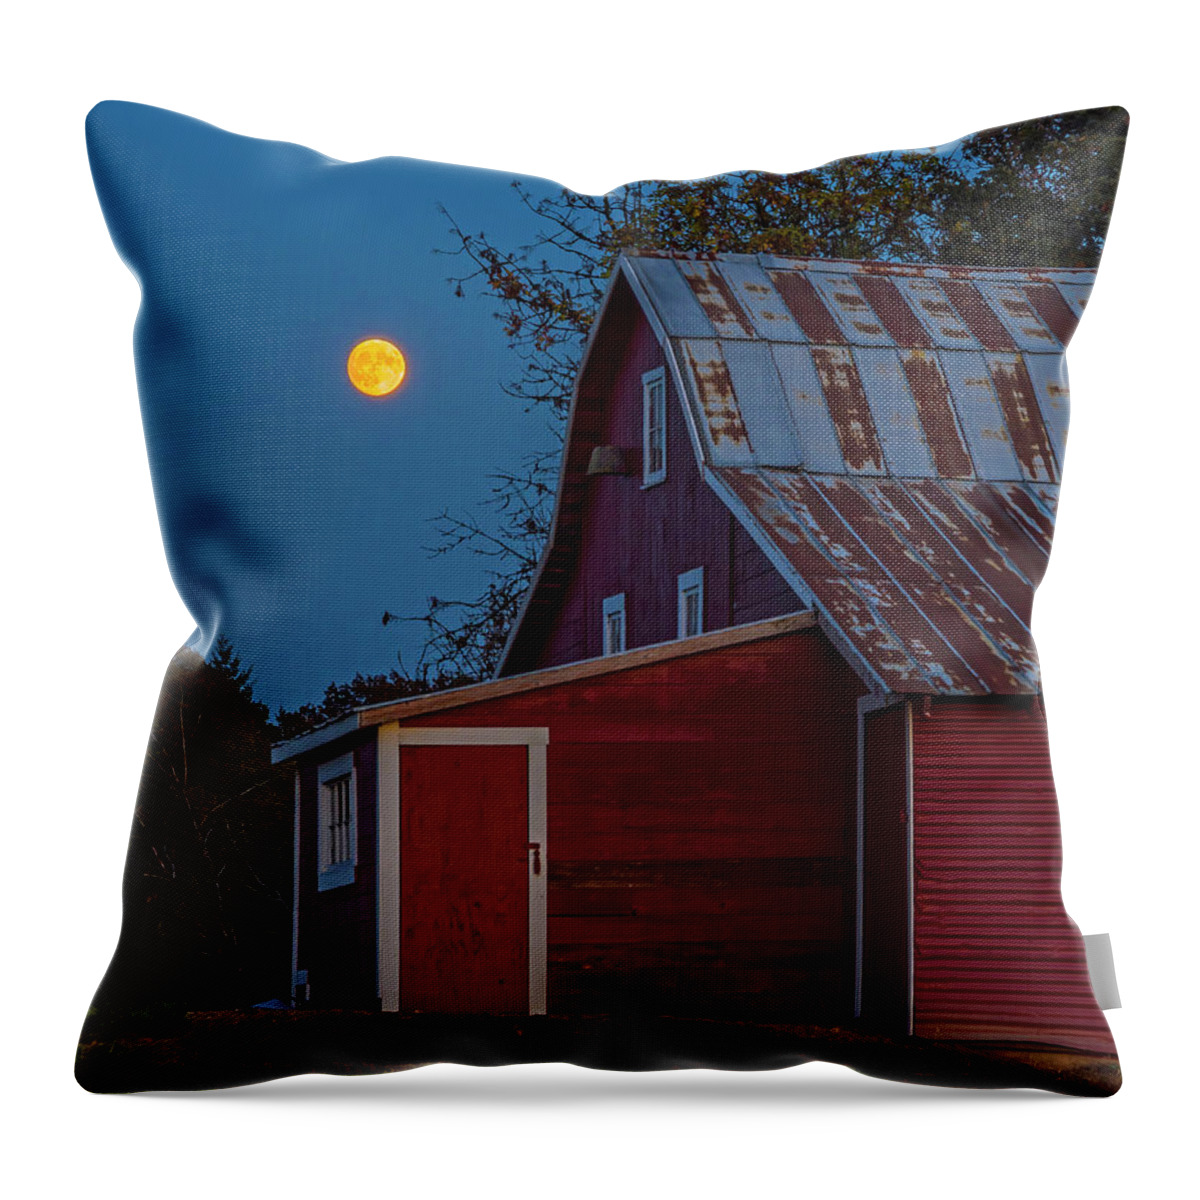 Full Moon Throw Pillow featuring the photograph Country moon. by Ulrich Burkhalter